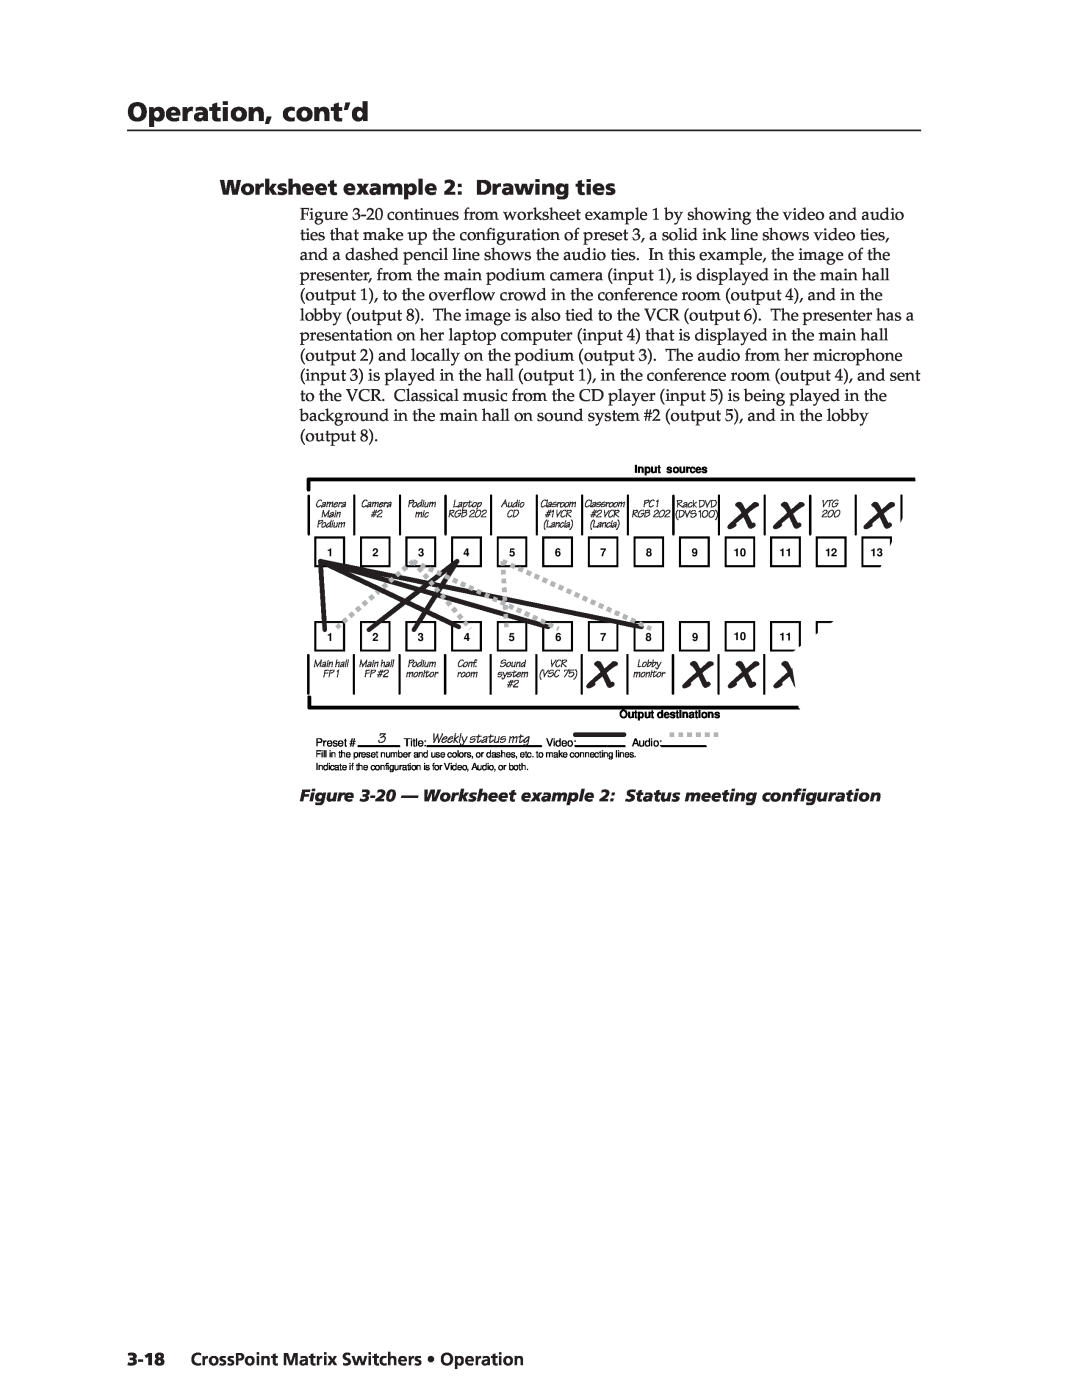 Extron electronic CrossPoint 84 Worksheet example 2 Drawing ties, 20 - Worksheet example 2 Status meeting configuration 